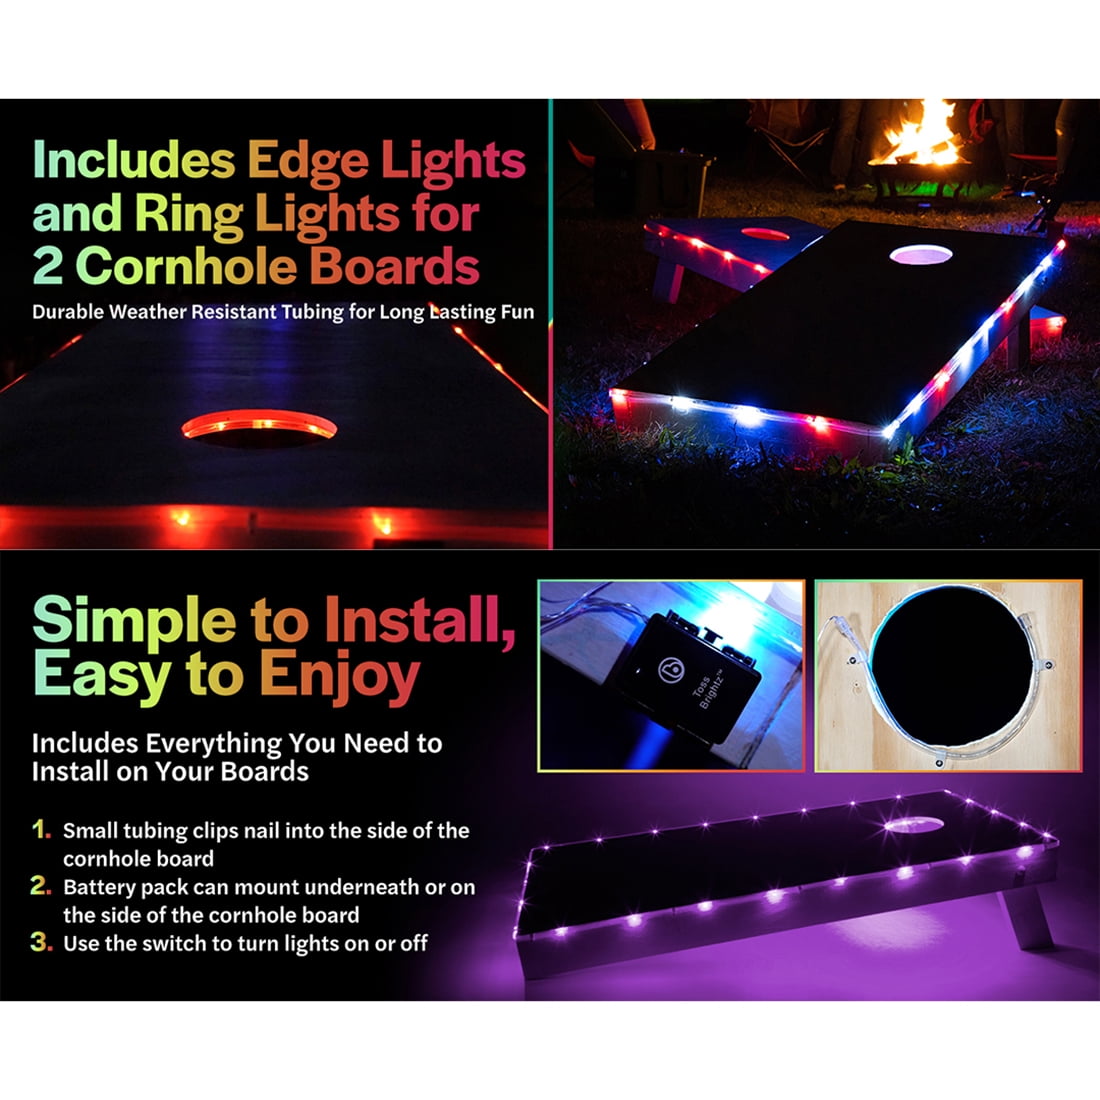 1pcs LED Cornhole Lights, Remote Control Cornhole Board Edge and Ring LED  Lights, 16Color change by yourself, a great addition for playing Bean Bag  Toss Cornhole game at the family backyard at